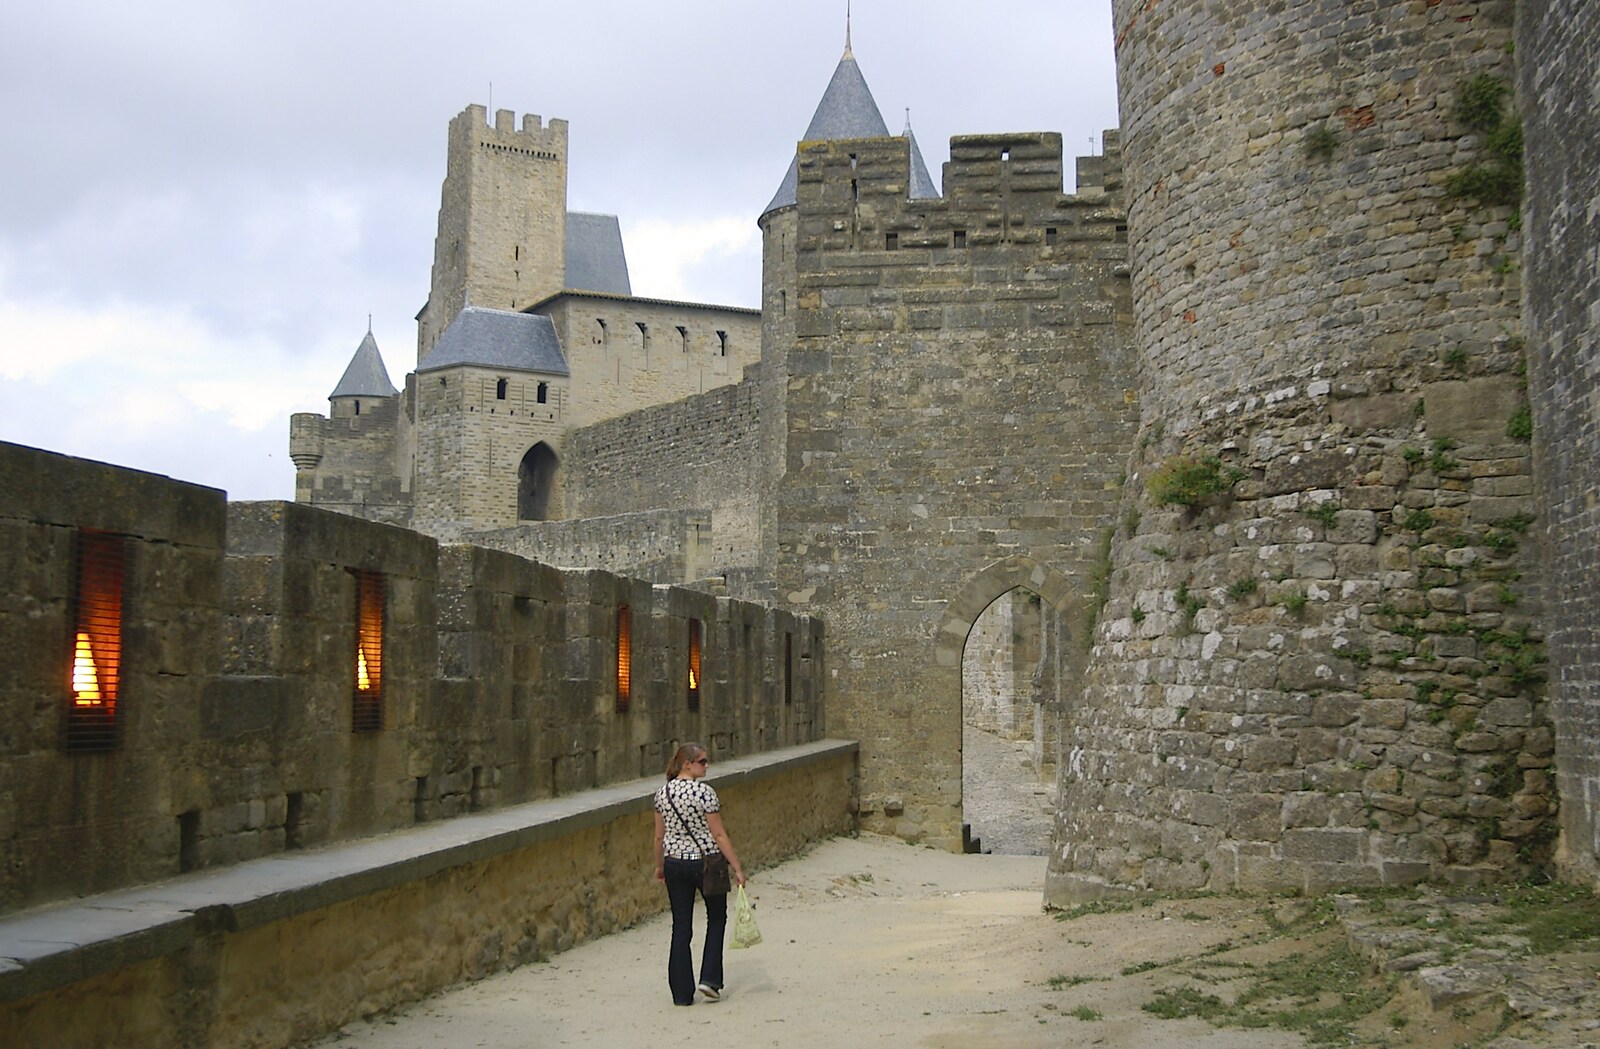 Isobel walks up from the Porte d'Aude from A Couple of Days in Carcassonne, Aude, France - 21st September 2006